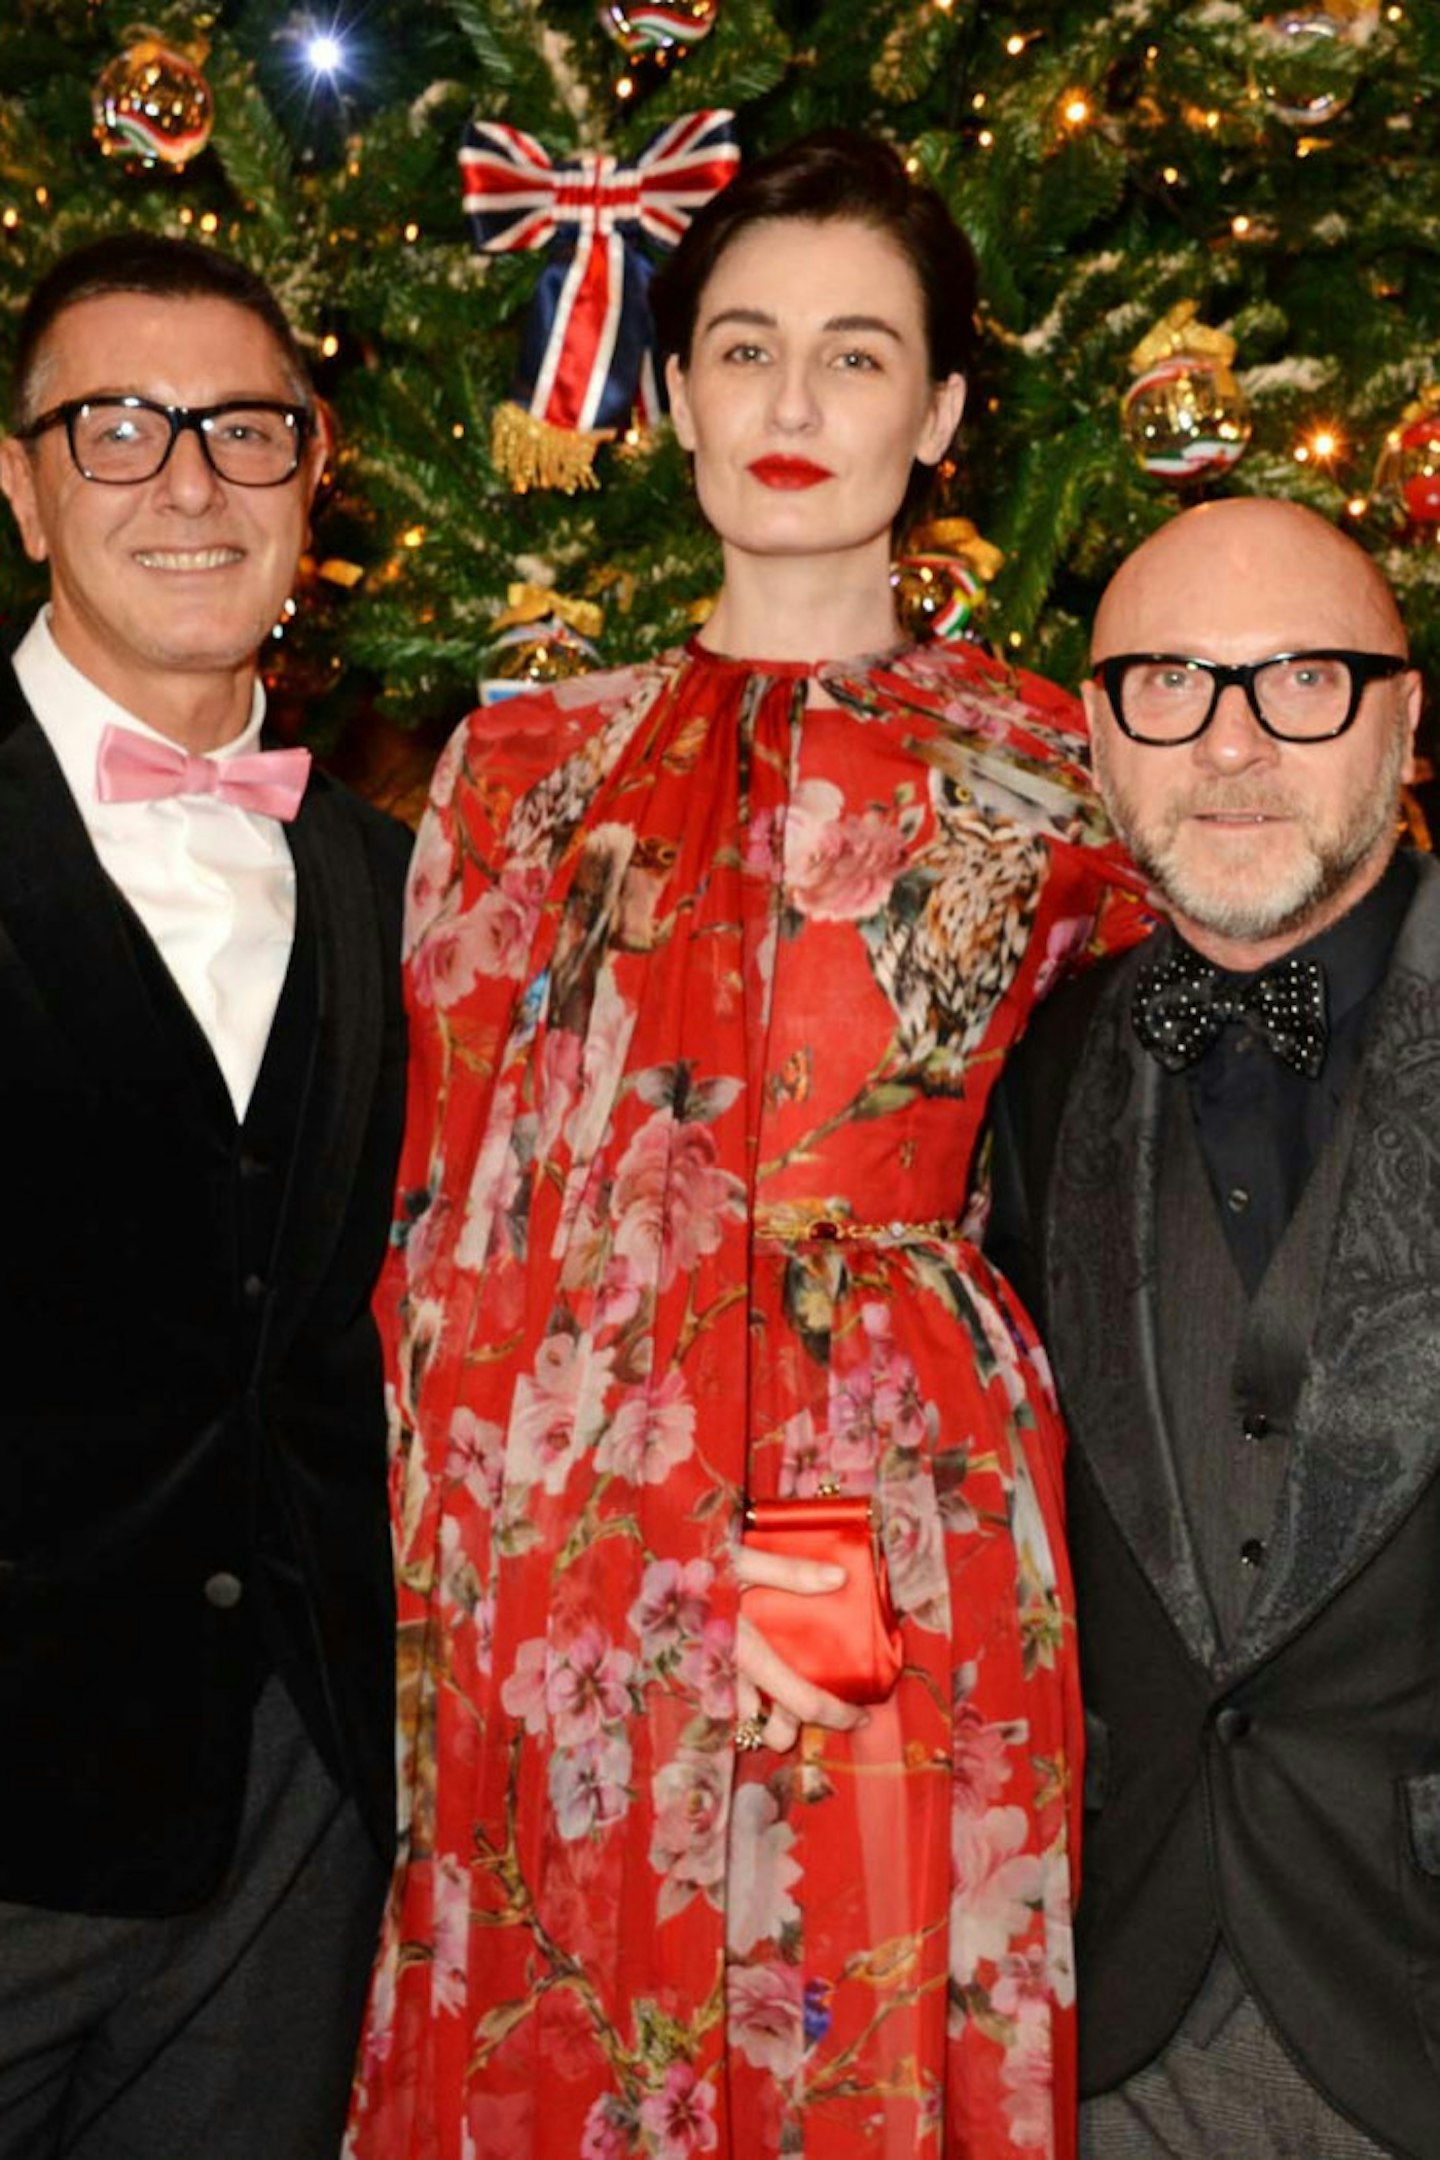 GALLERY>> Inside the Dolce & Gabbana party at Claridge's